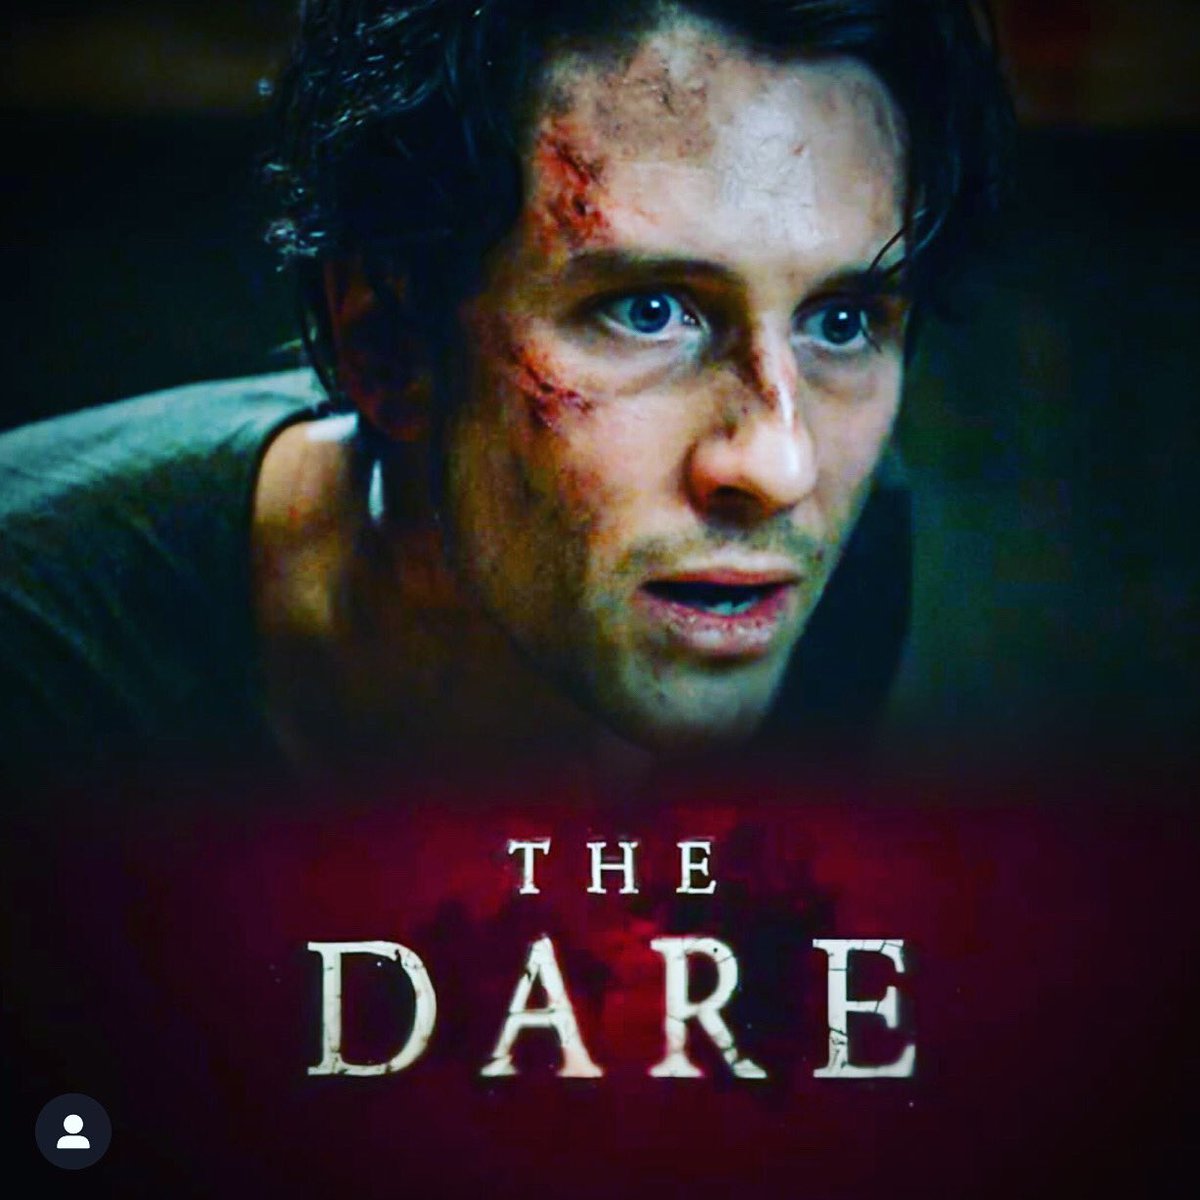 It’s the WEEKEND so here is the fantastic @bartedwards in a still from @thedaremovie which is out now !

In the US or Canada? Grab a copy here : amzn.to/2xmncDr 

Dir: @gilesalderson  
Distro: @thehorrorco  
Prod @juliankostov 
DP @35mmdop